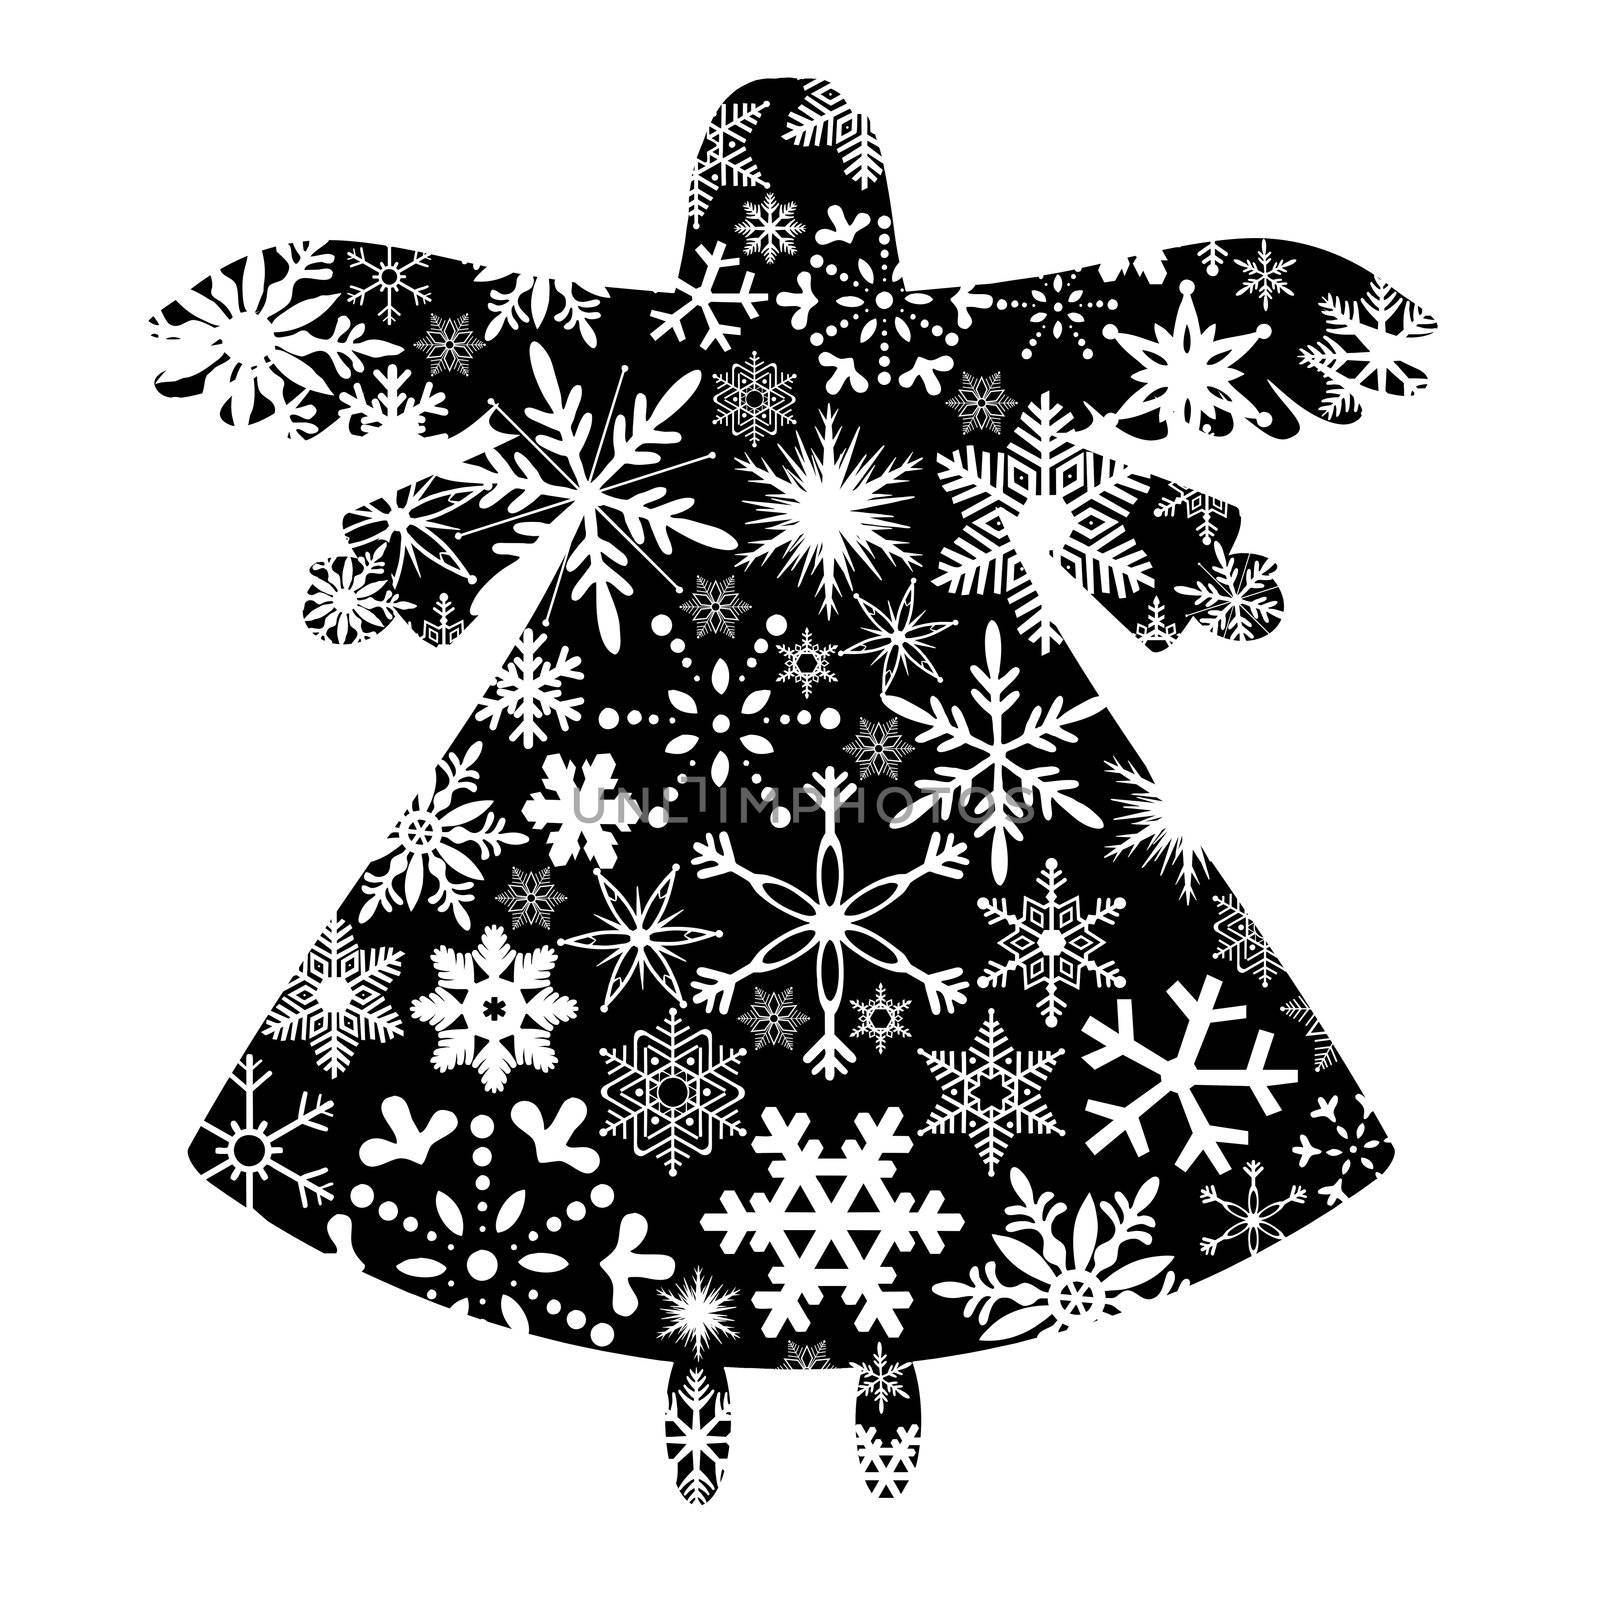 Christmas Angel Silhouette with Snowflakes Design Clipart Illustration